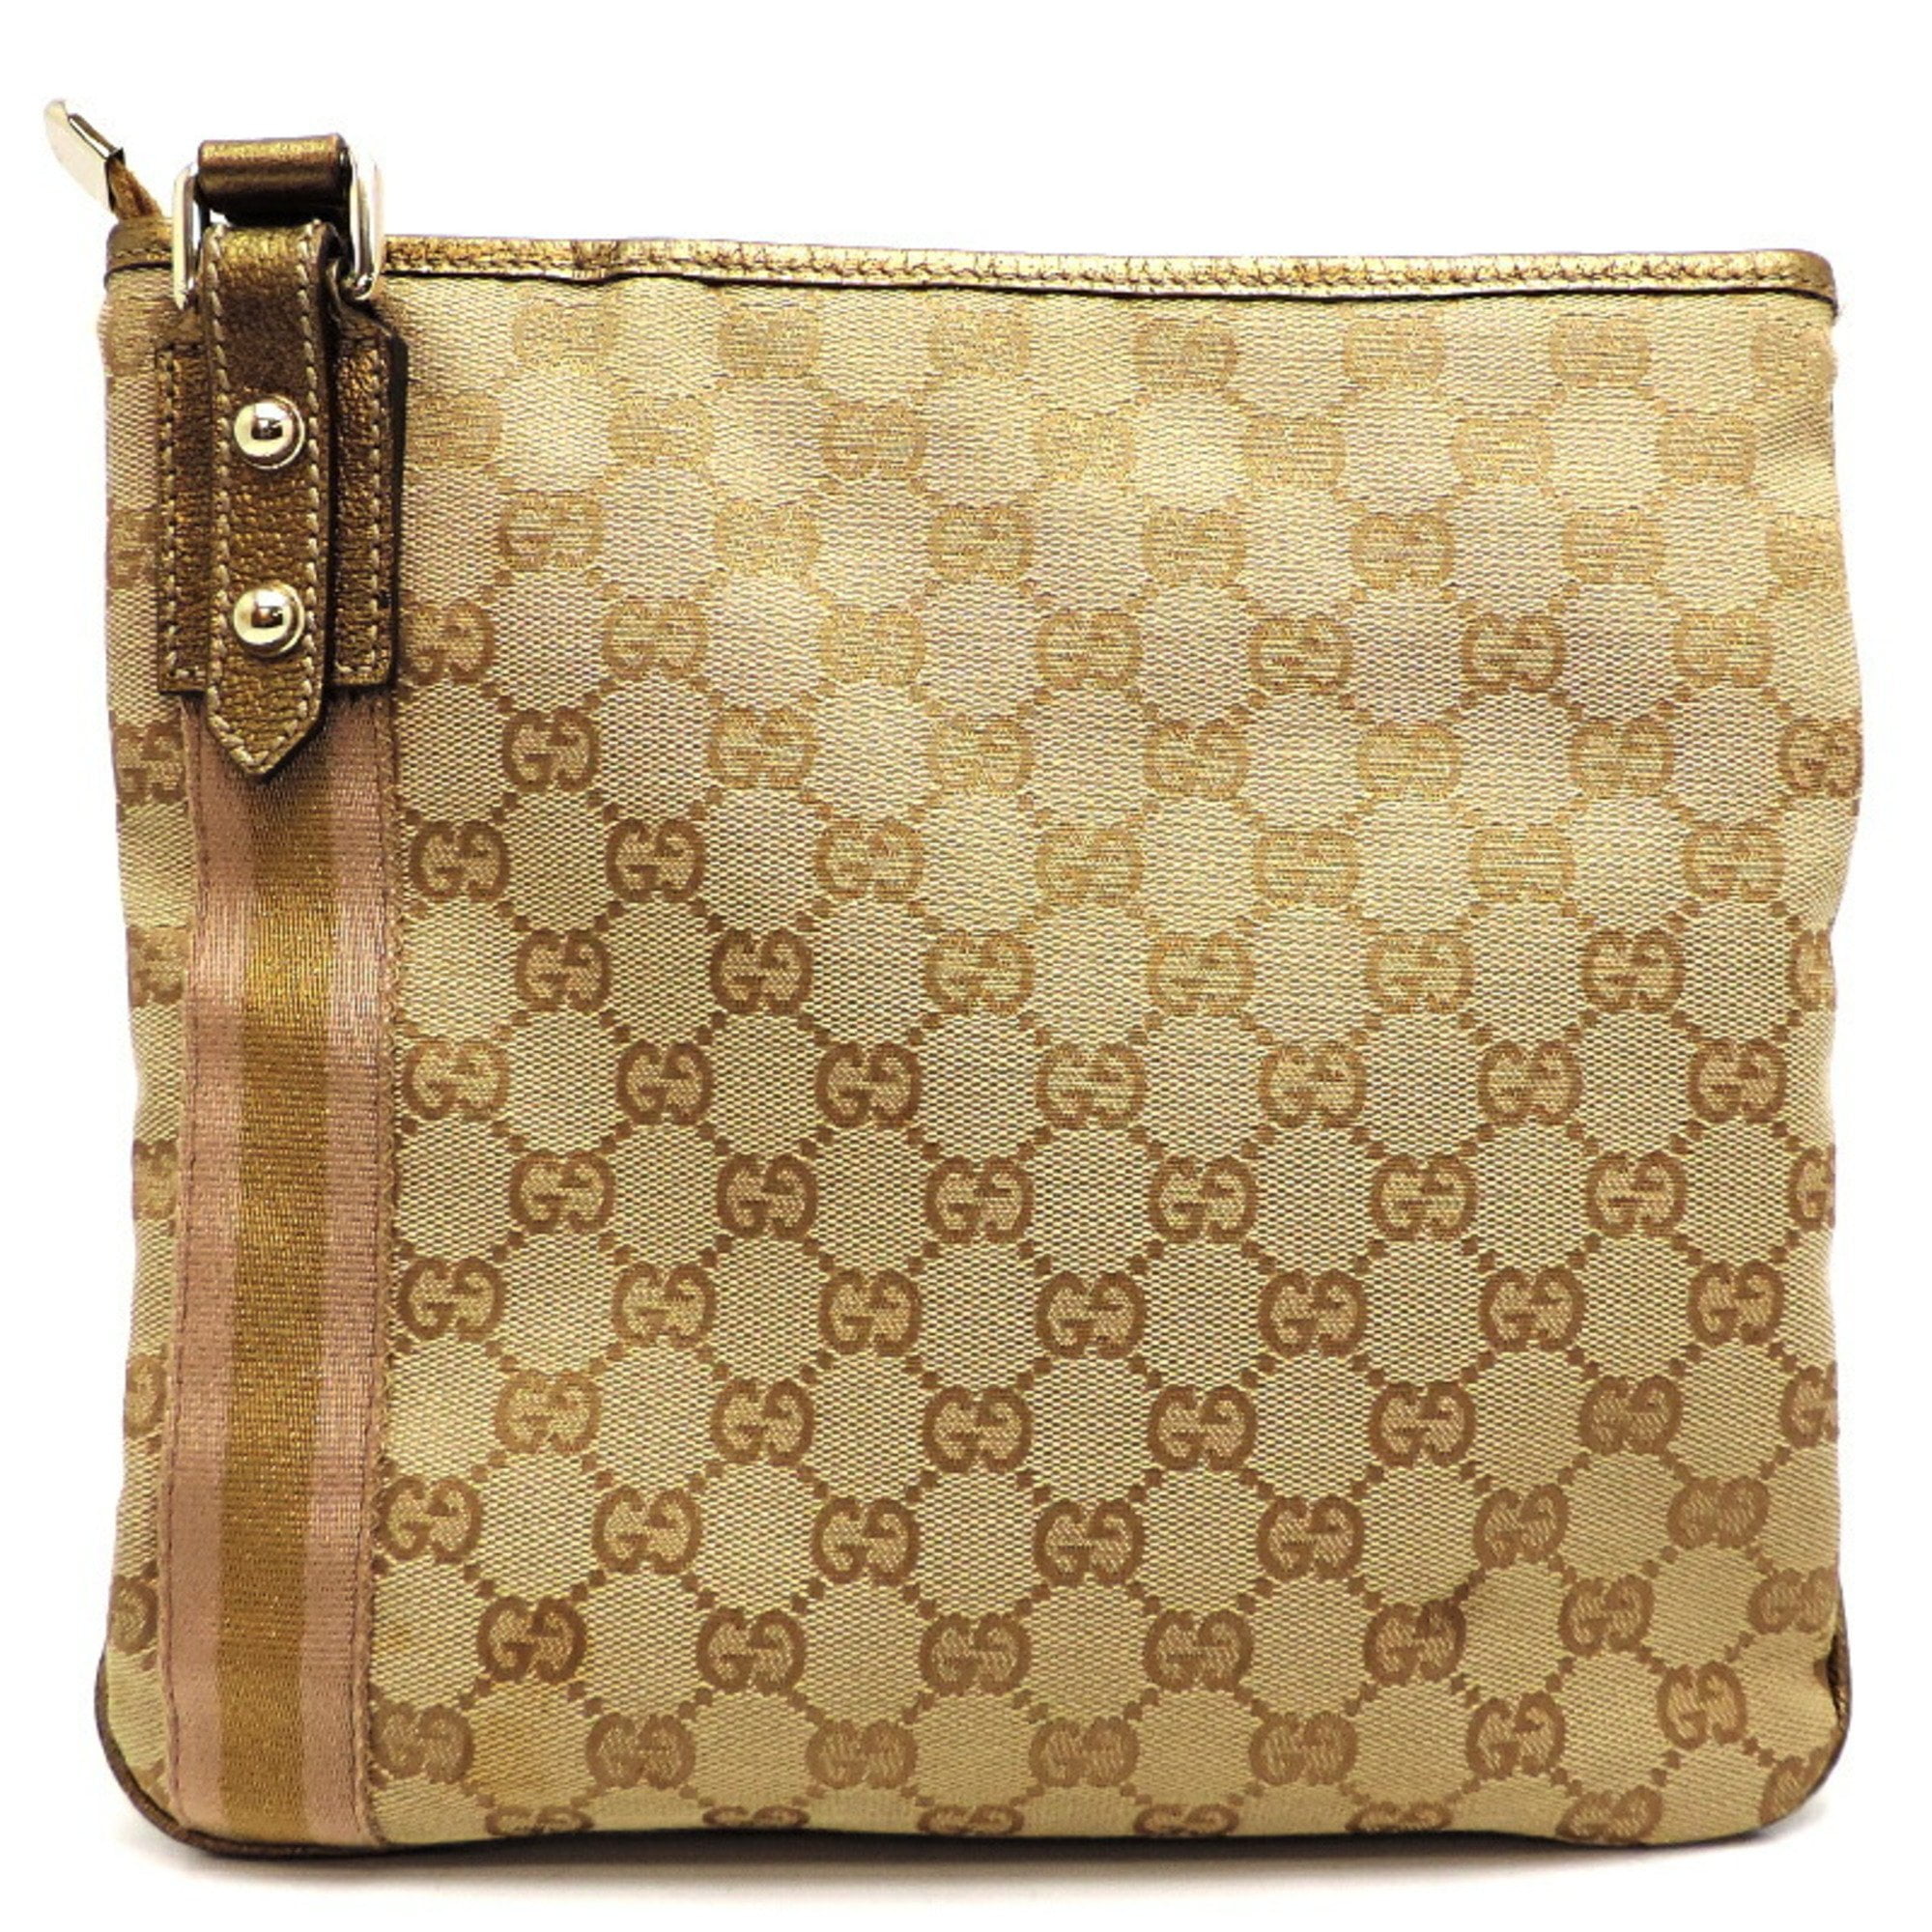 Gucci - Authenticated Dôme Handbag - Leather Beige Plain for Women, Very Good Condition